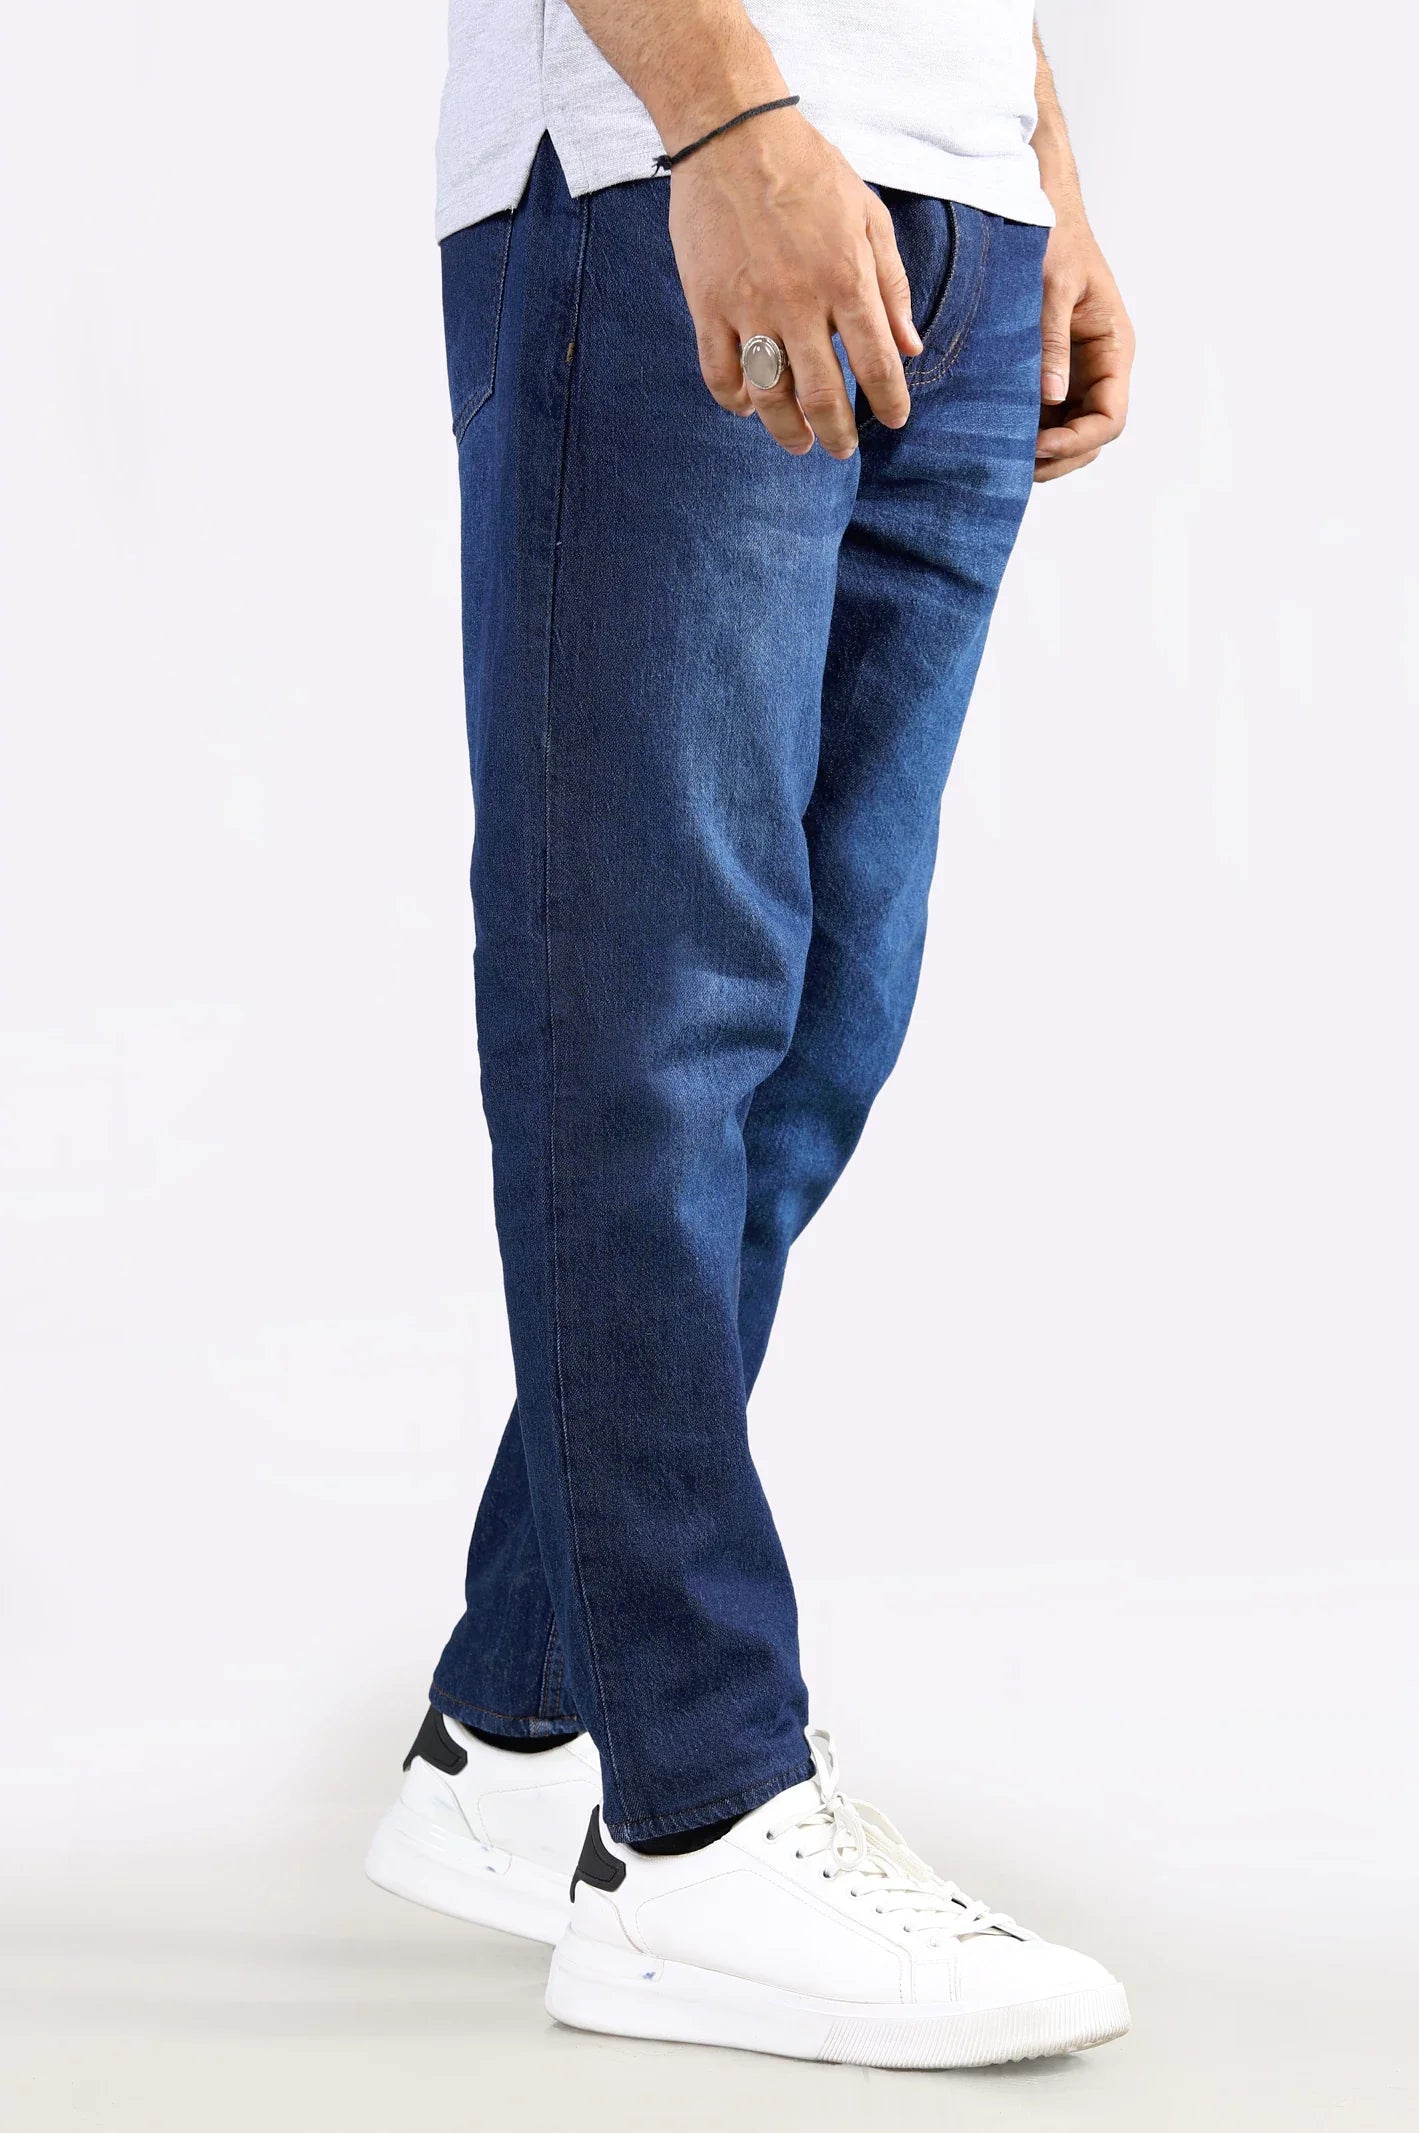 Dark Blue Smart Fit Jeans From Diners